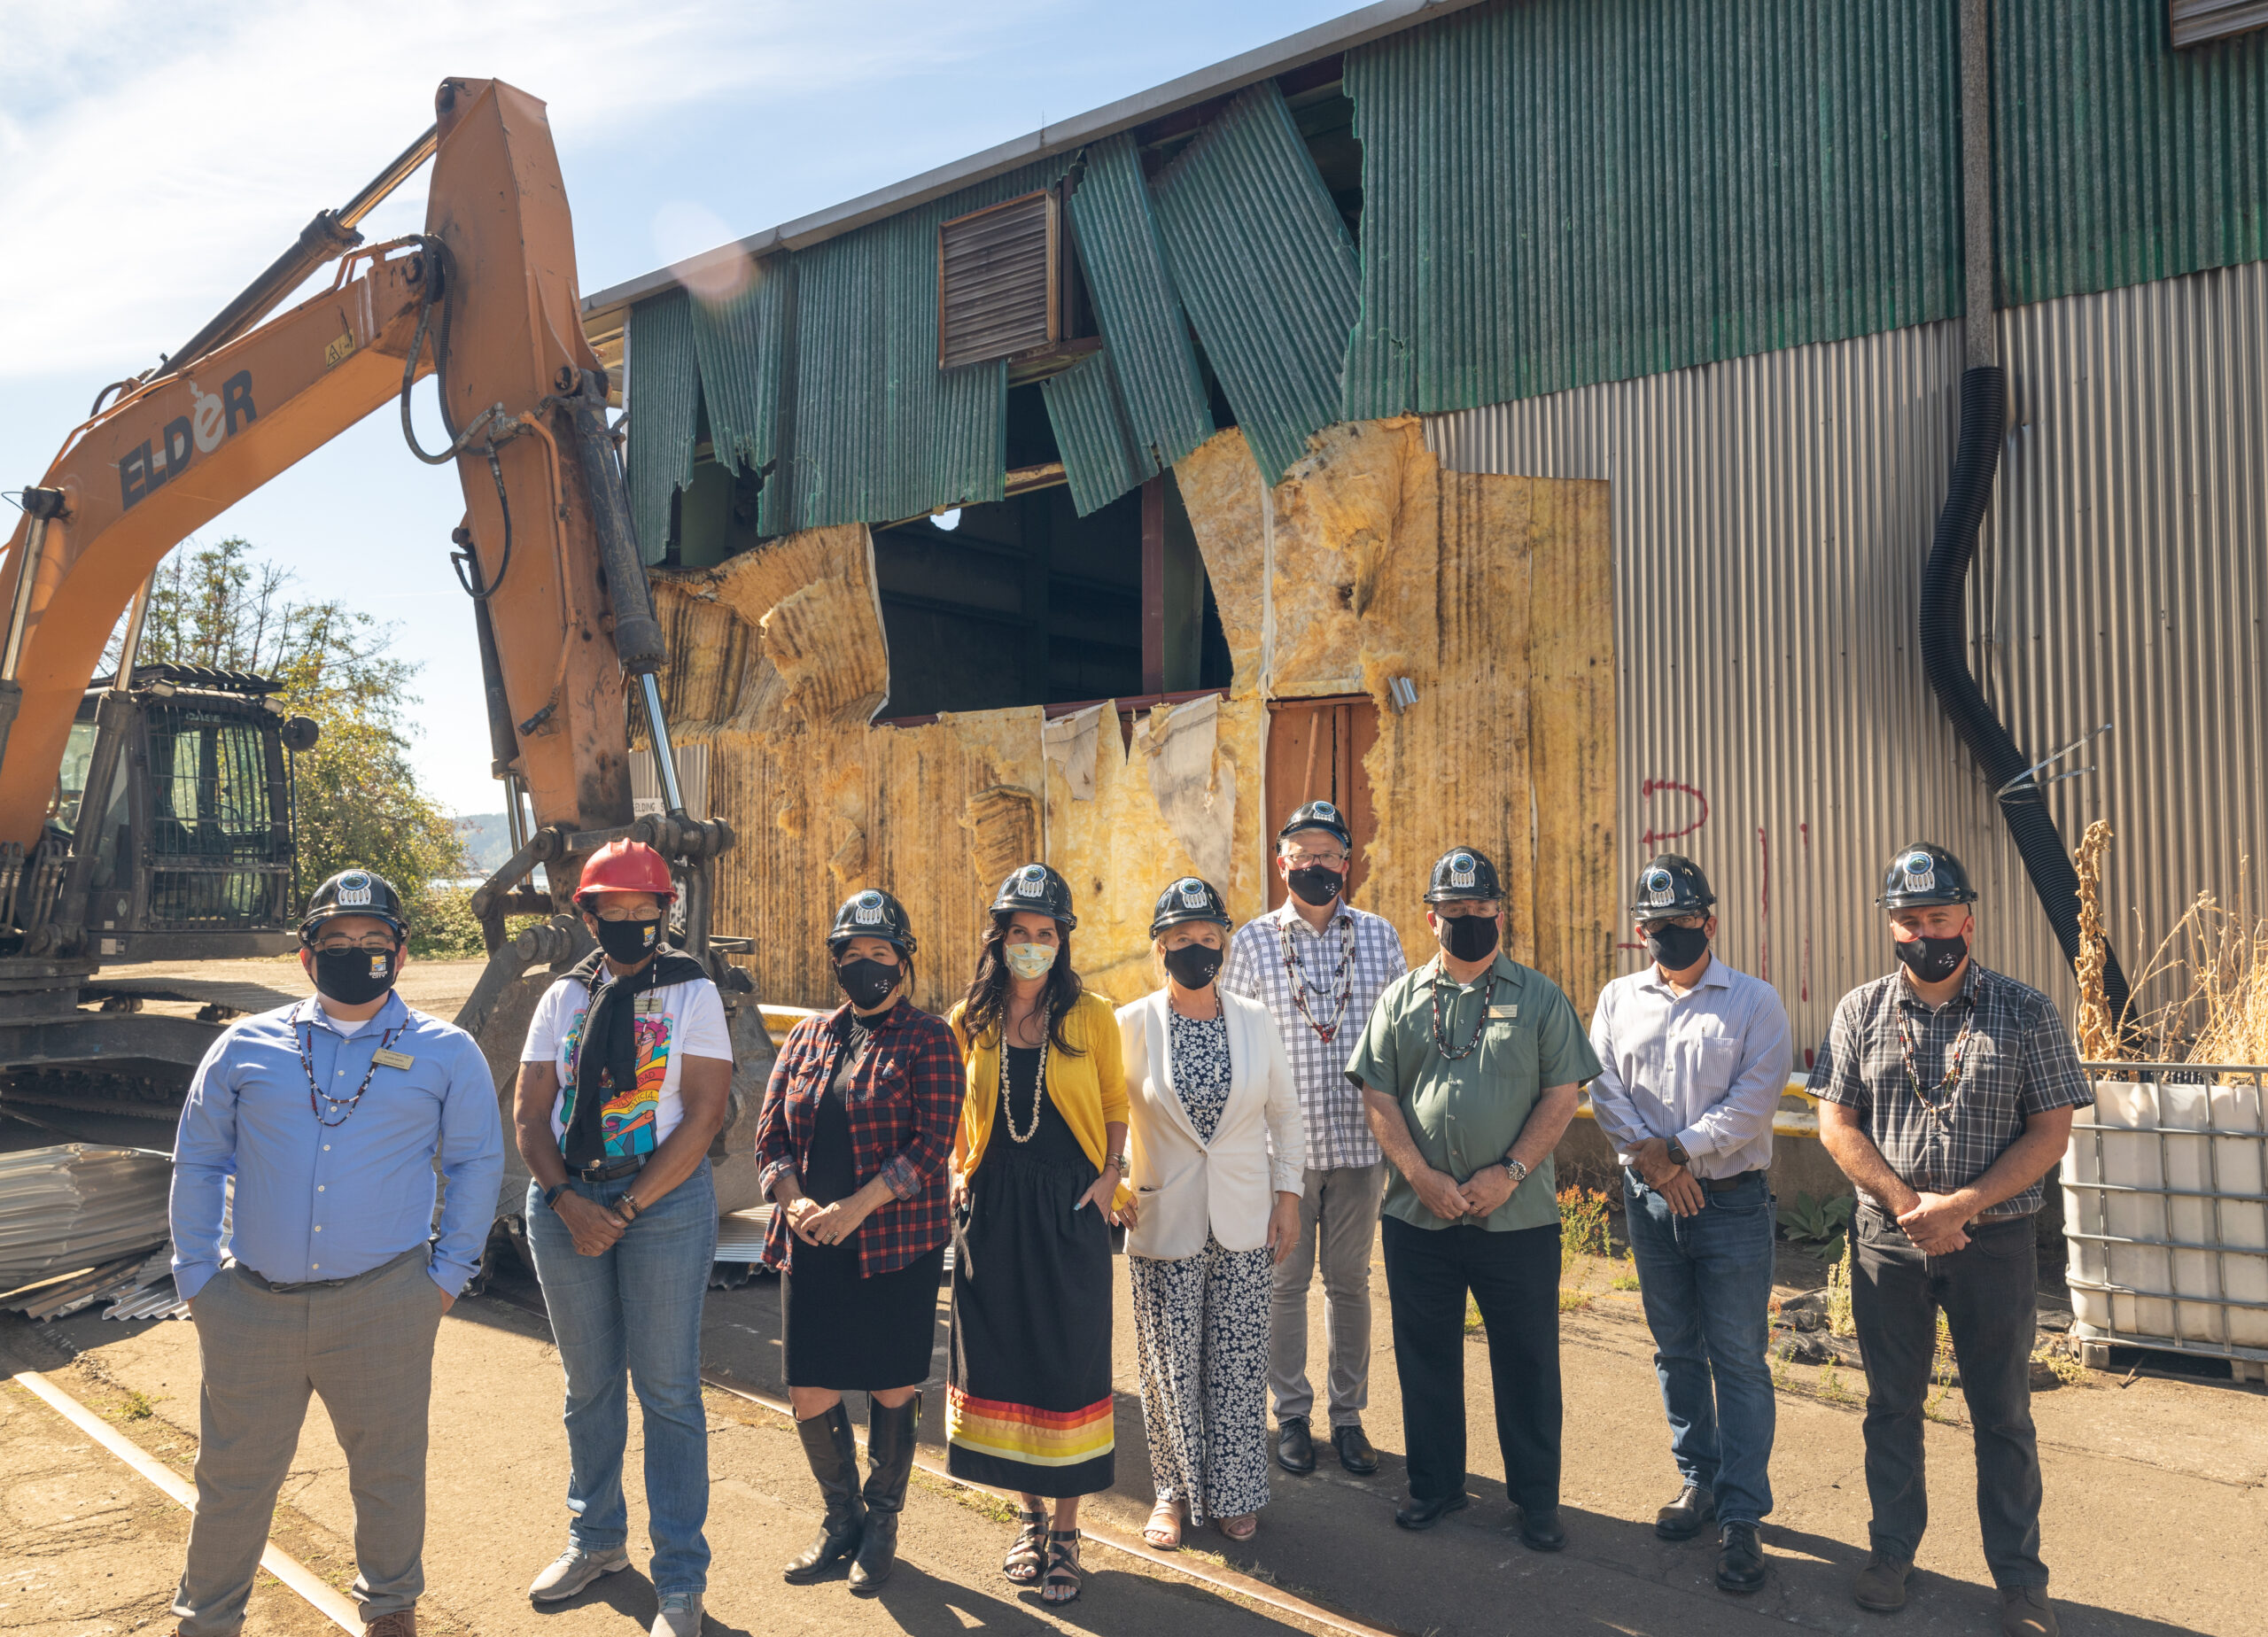 Public and Tribal officials in front of an old warehouse and construction equipment.